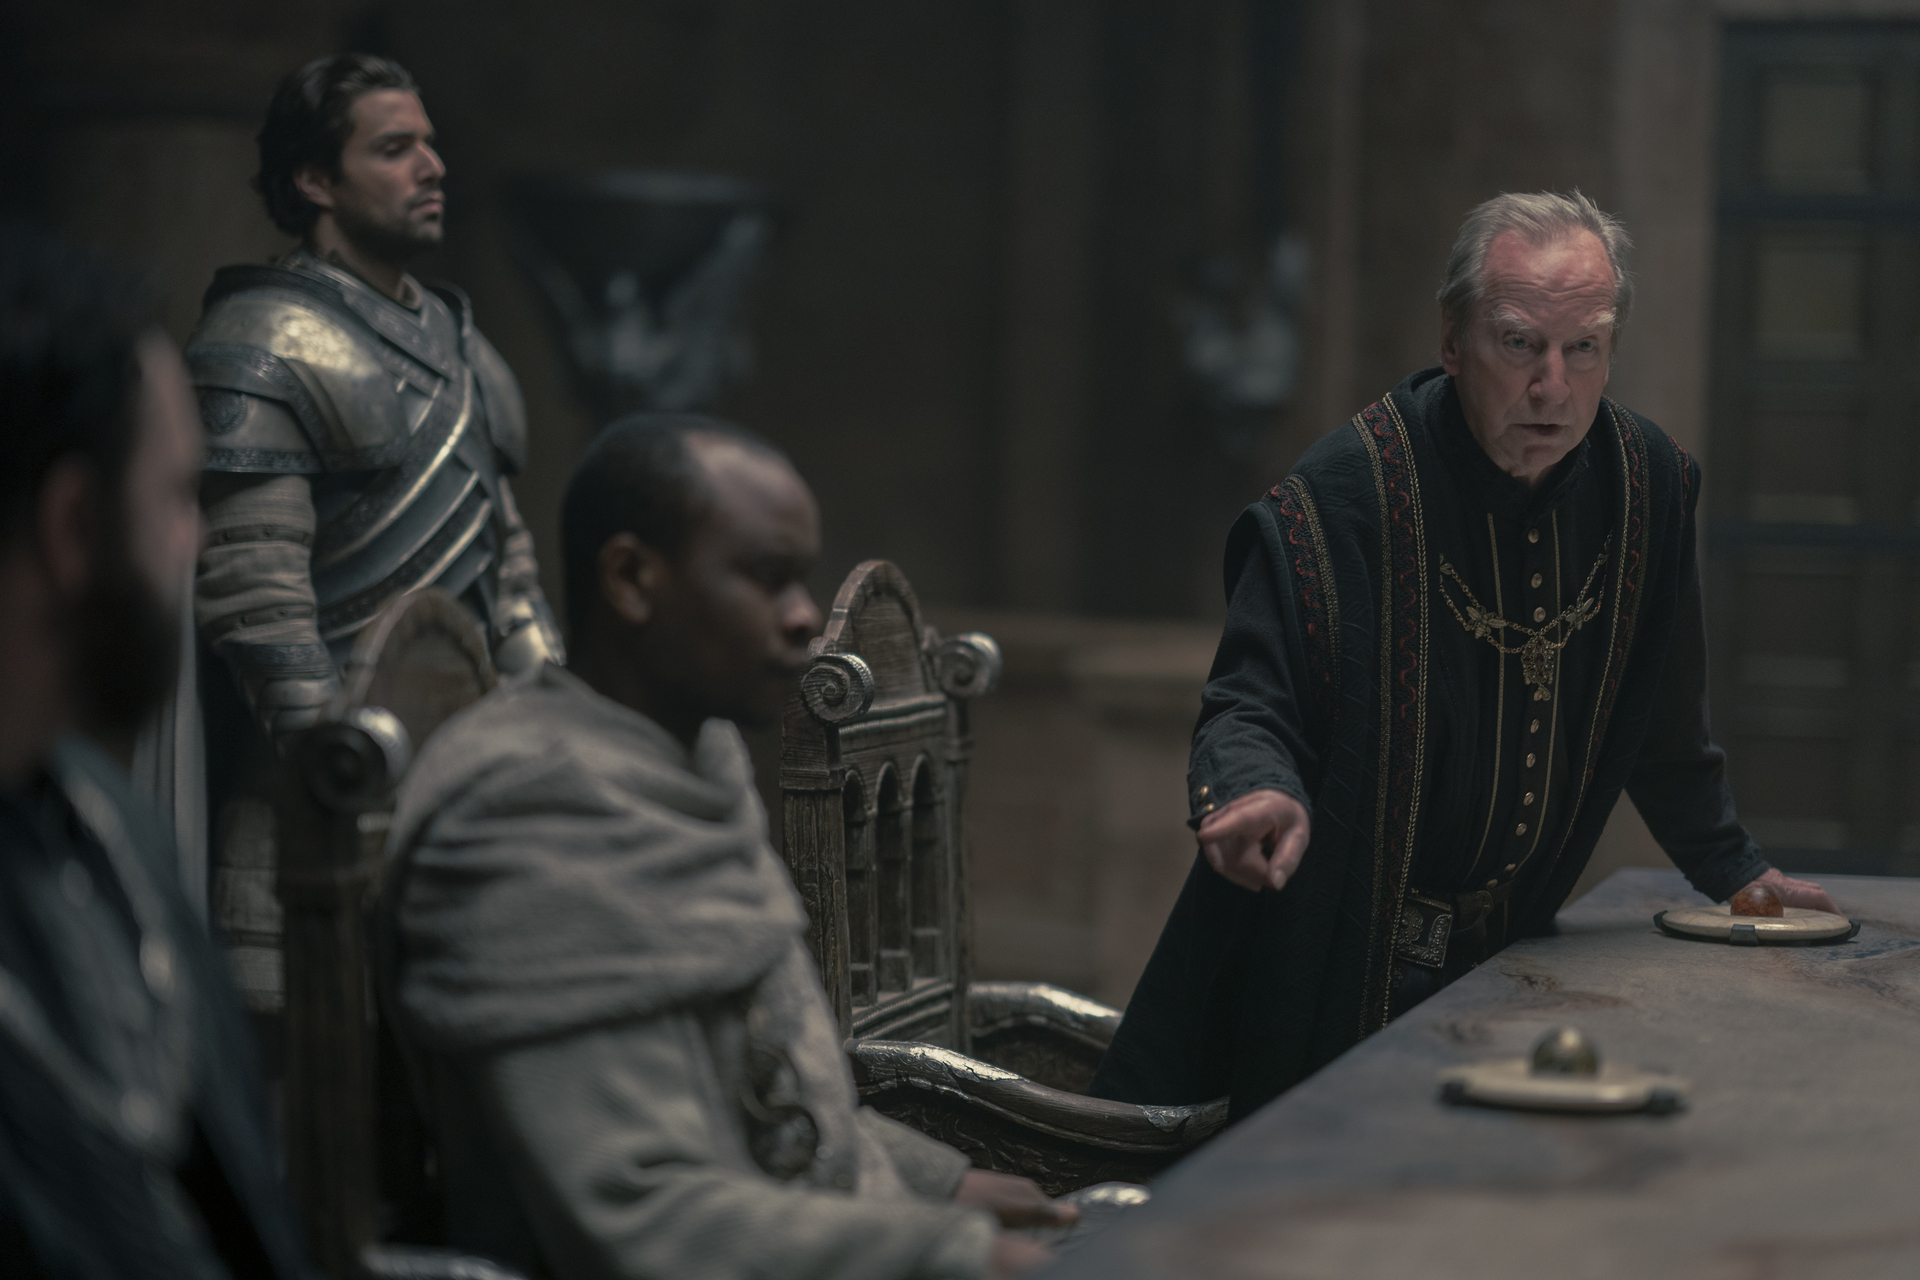 King's Landing Red Keep Small Council, Lyman Beesbury (Bill Paterson), Criston Cole (Fabien Frankel), 1x09 (1)